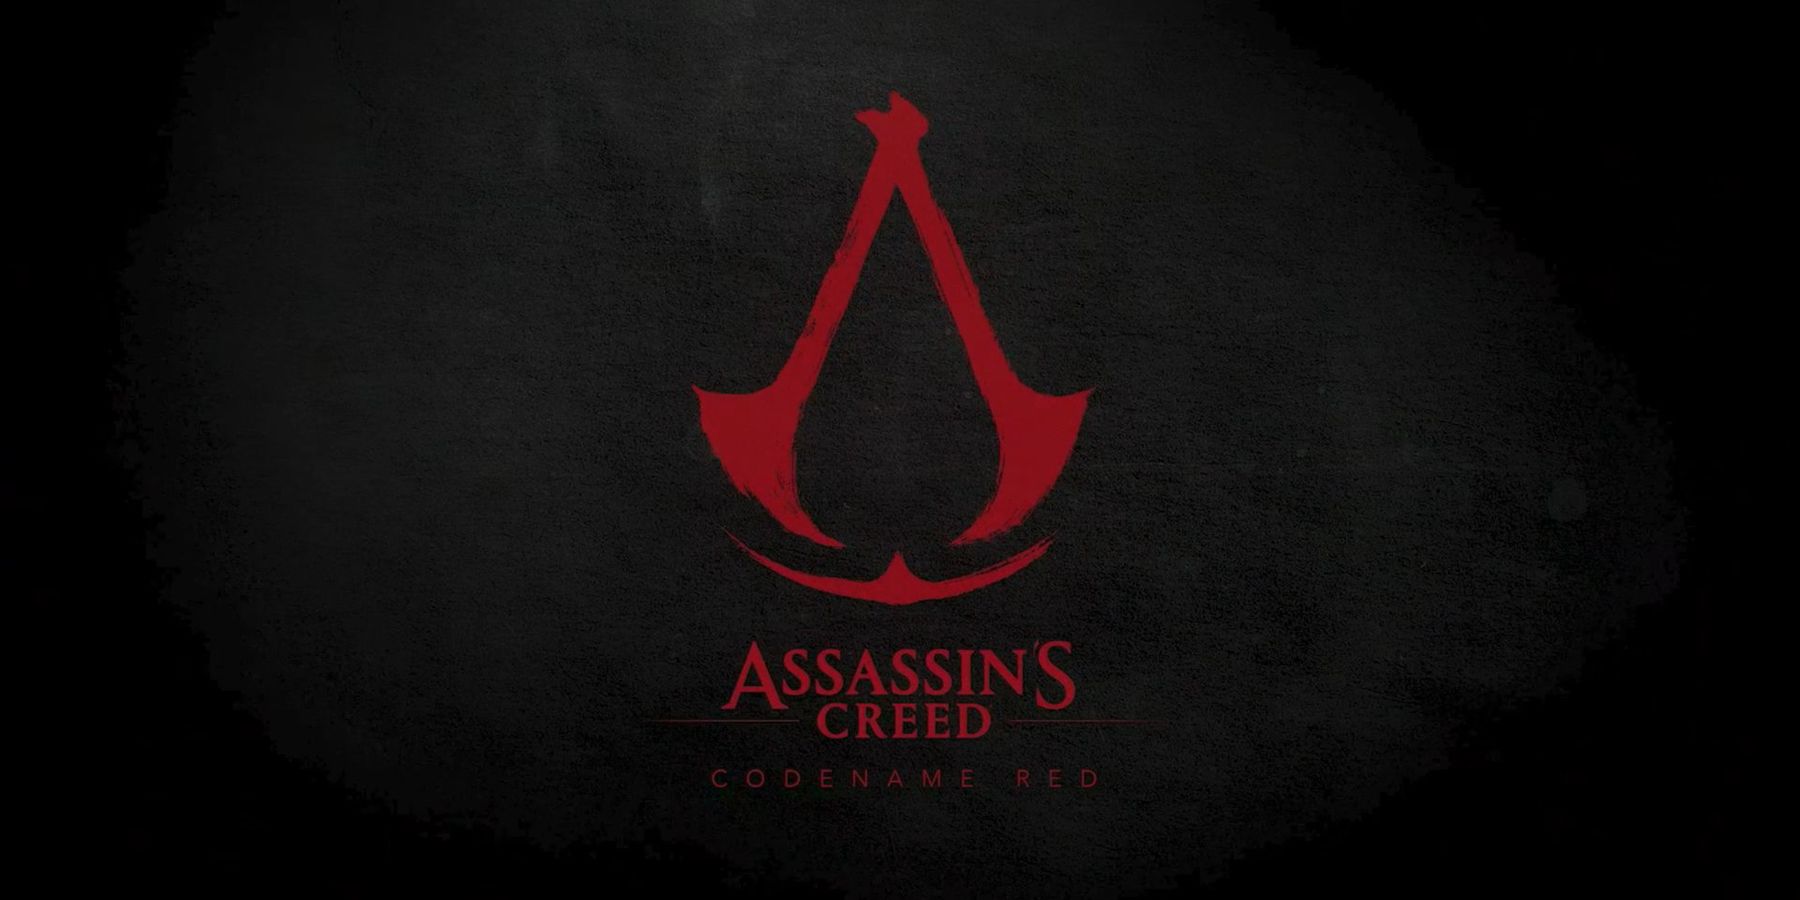 Assassin's Creed Codename Red logo